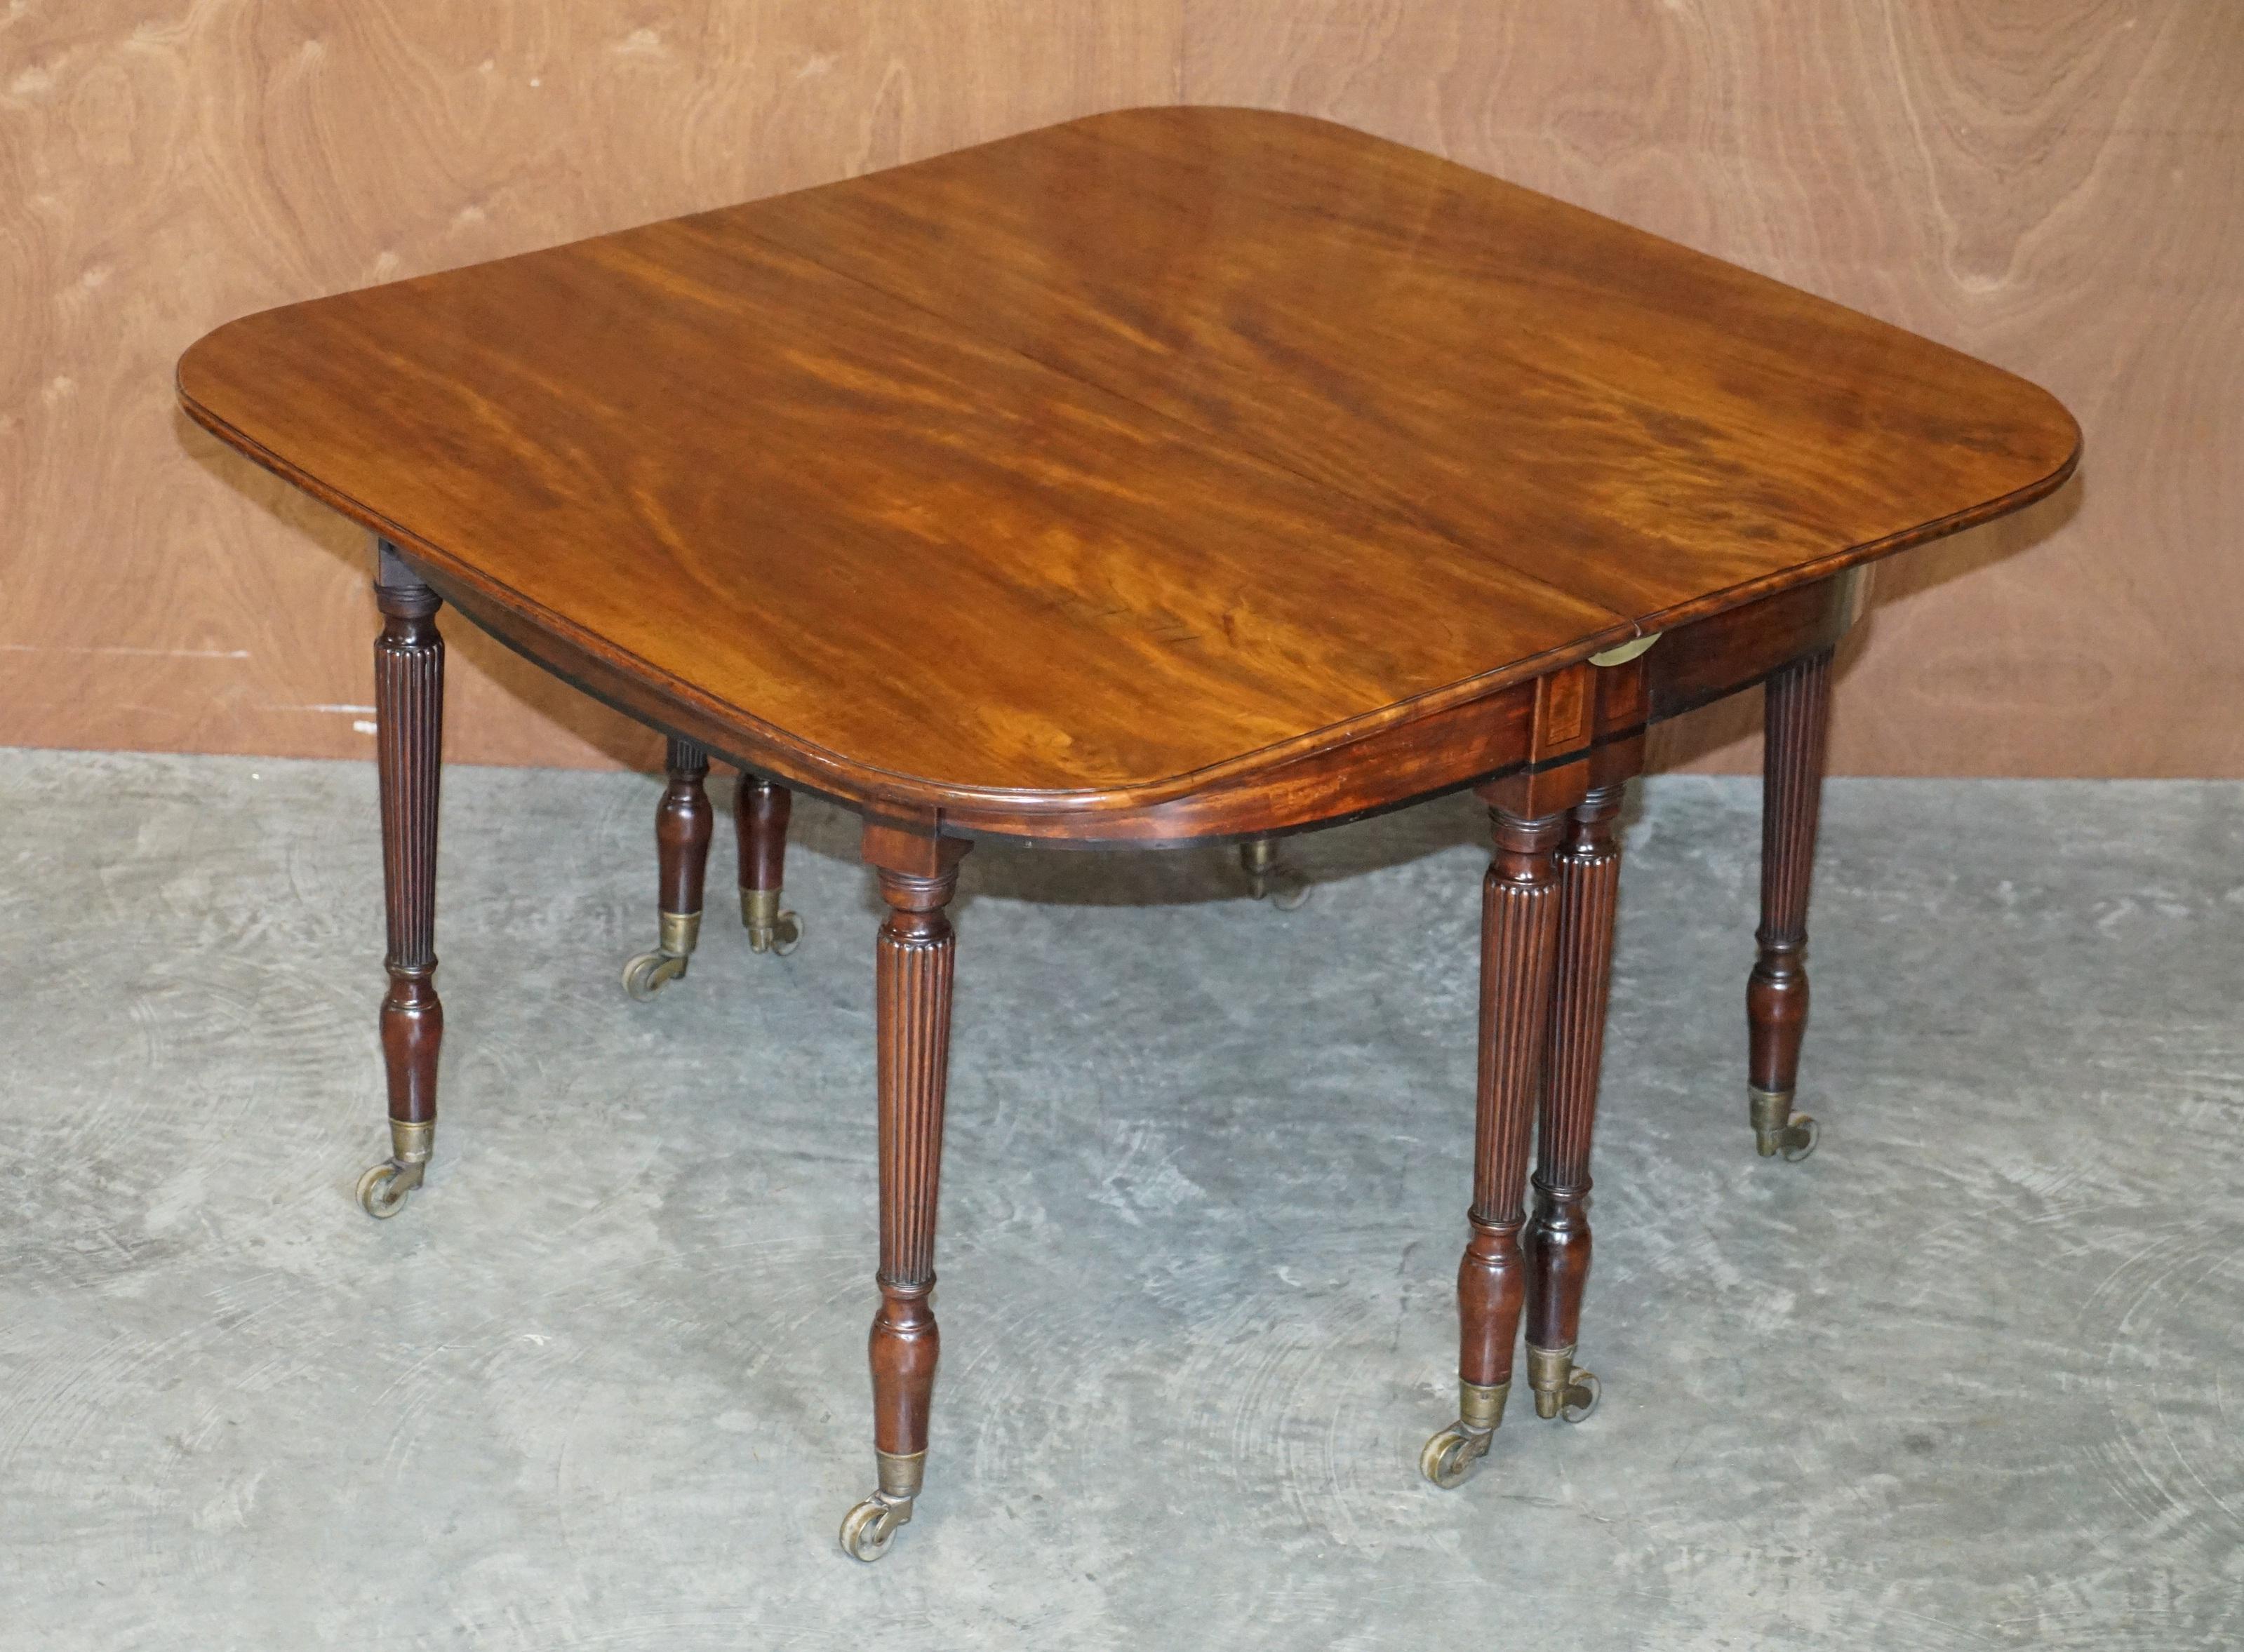 We are delighted to offer for sale this wonderfully restored circa 1830 William IV Figured Mahogany extending dining table after a design by Gillows

This table is exquisite with a timber patina to die for, the rich warm grain is truly stunning in